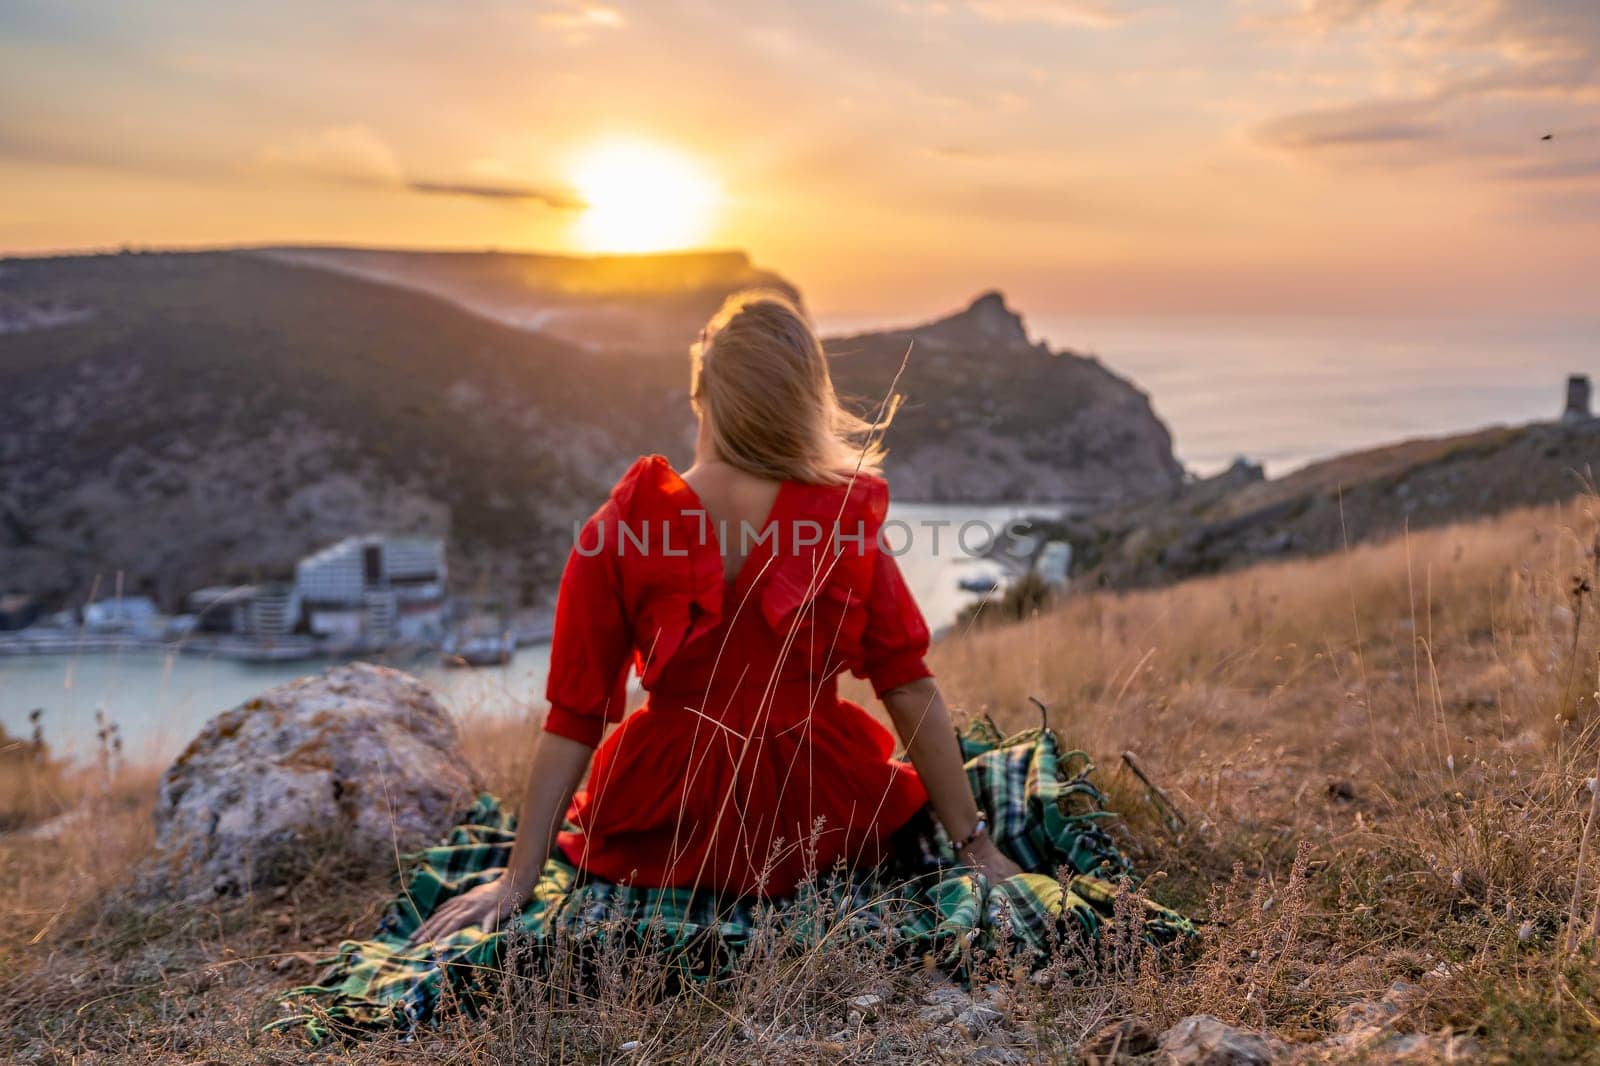 Woman sunset sea mountains. Happy woman siting with her back on the sunset in nature summer posing with mountains on sunset, silhouette. Woman in the mountains red dress, eco friendly, summer landscape active rest.